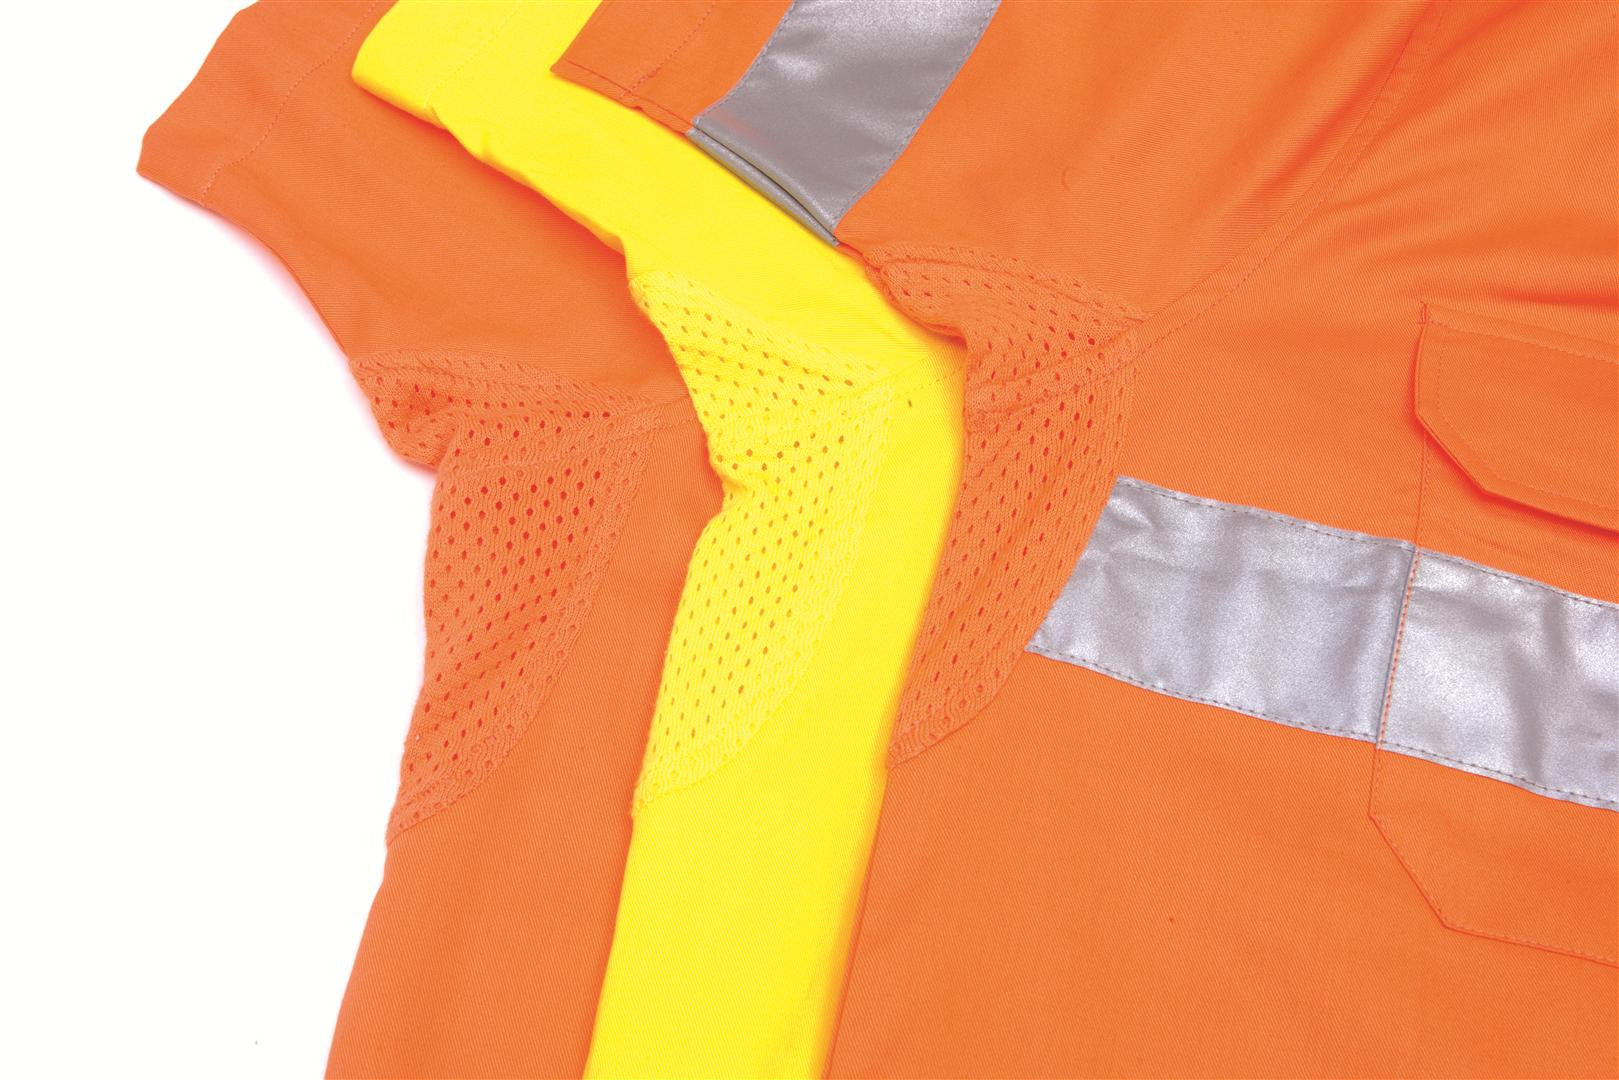 DNC HiVis Two Tone Cool-Breeze Cotton Shirt with 3M Reflective Tape, S/S (3887)